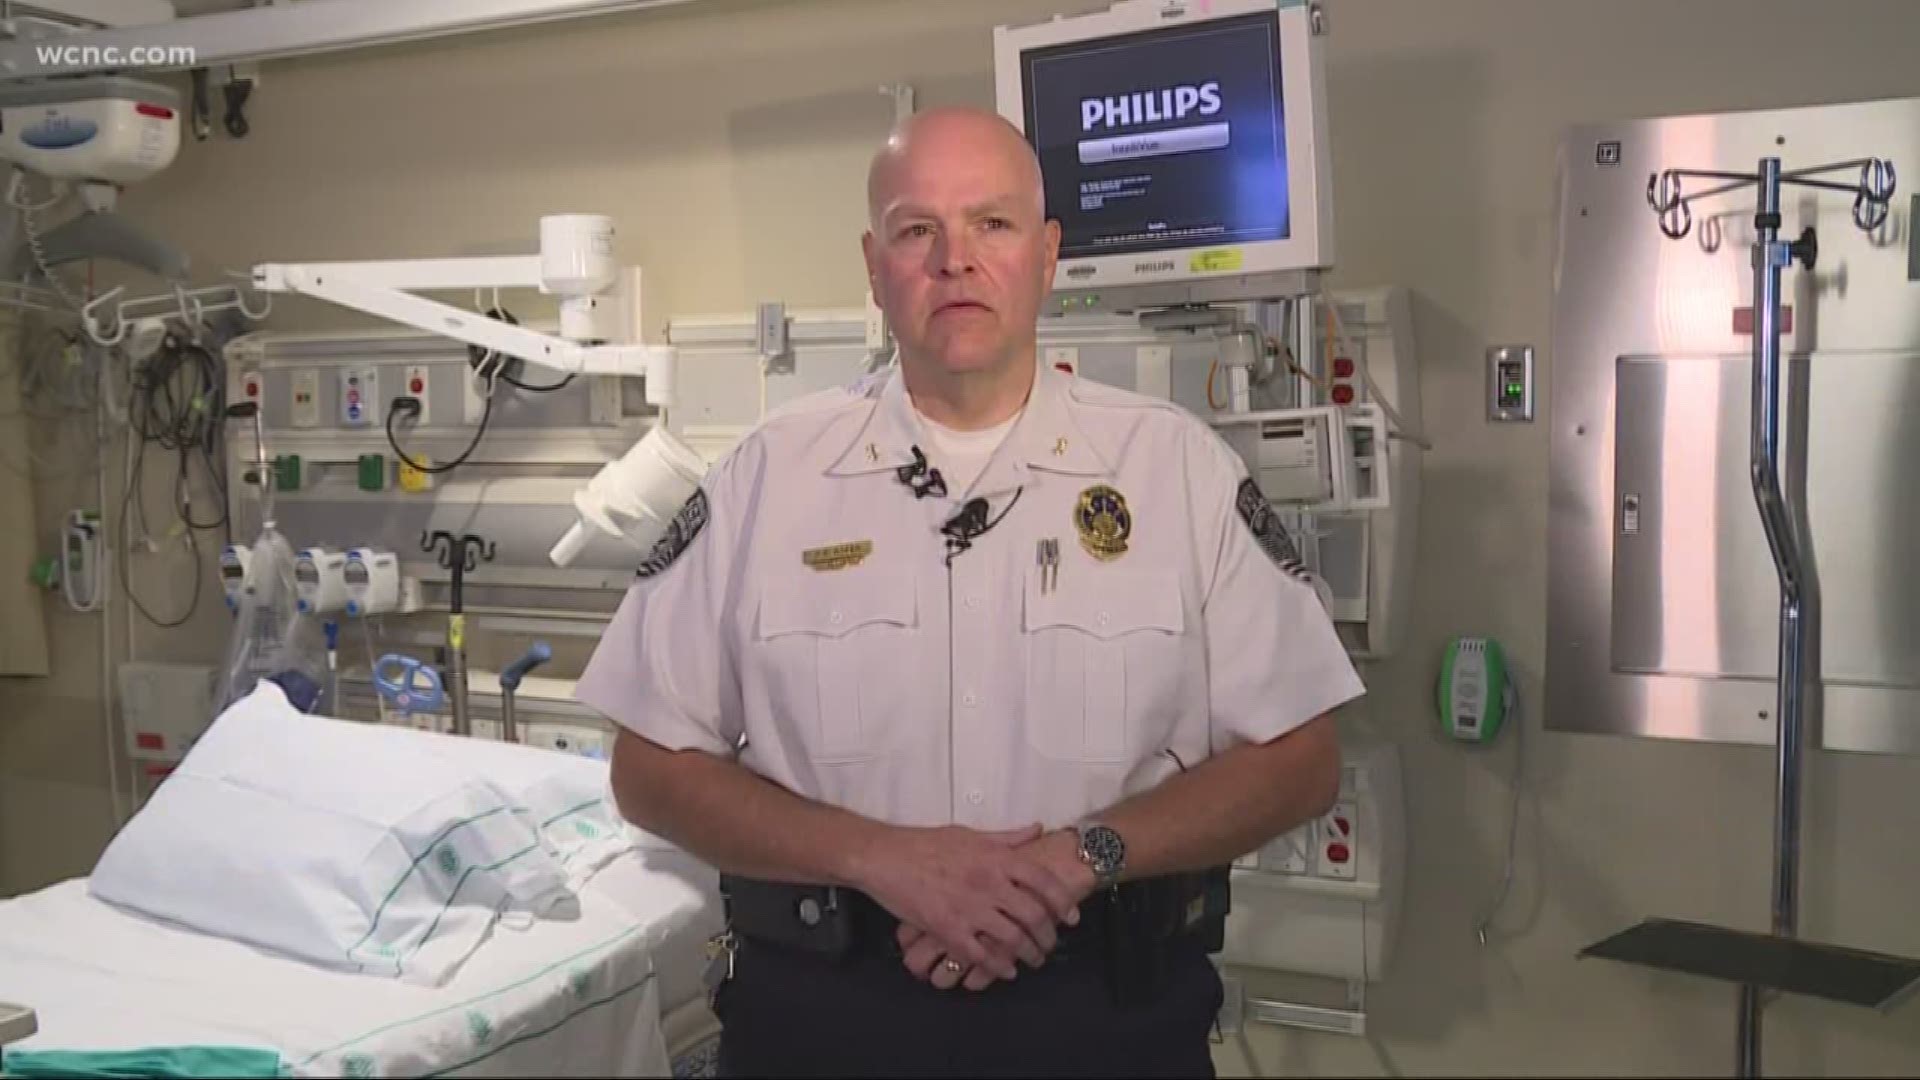 Just three weeks after suffering a massive stroke the Mount Holly Police Chief is back on the job.